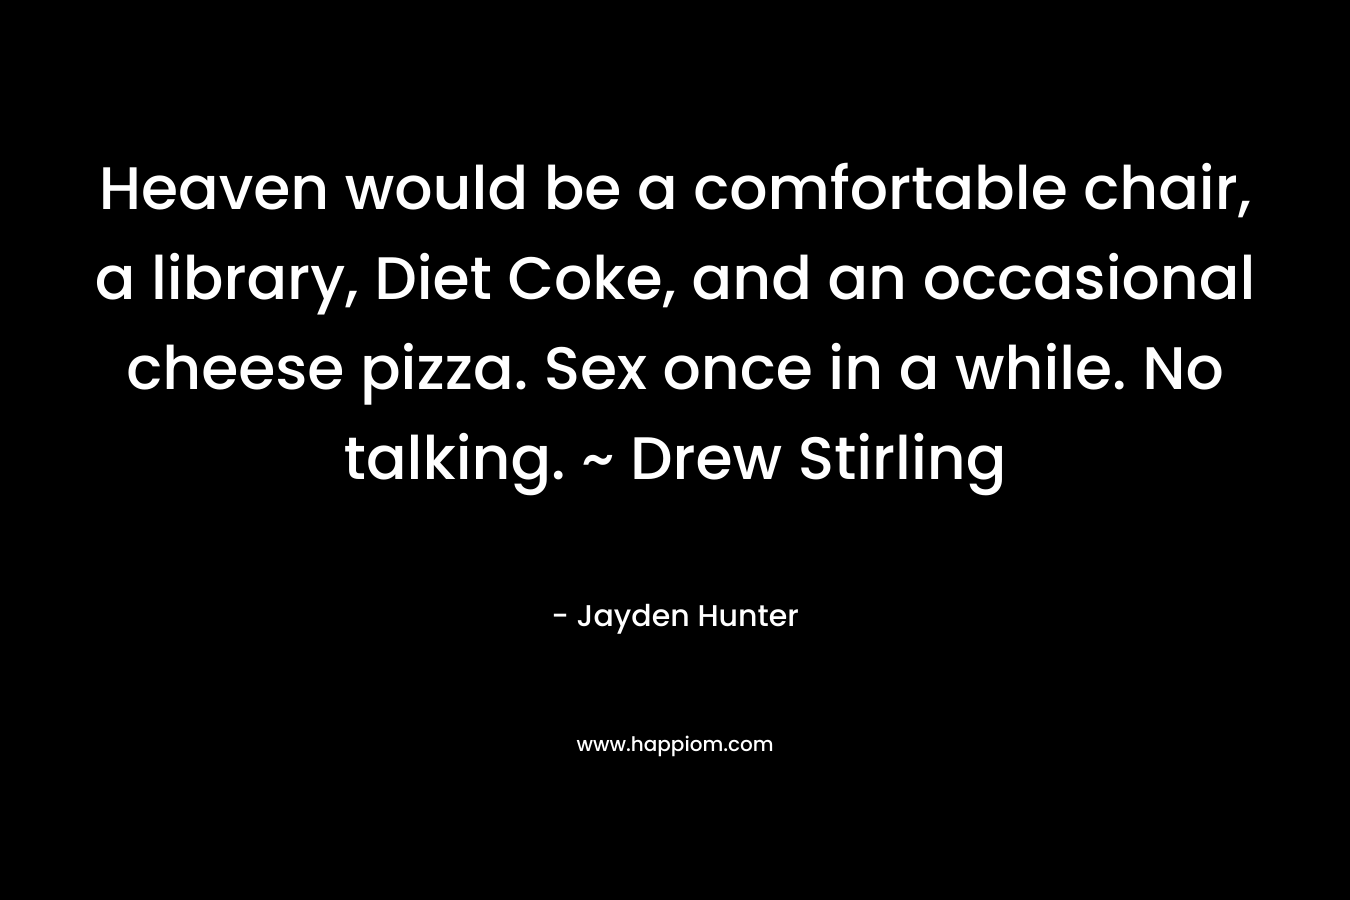 Heaven would be a comfortable chair, a library, Diet Coke, and an occasional cheese pizza. Sex once in a while. No talking. ~ Drew Stirling